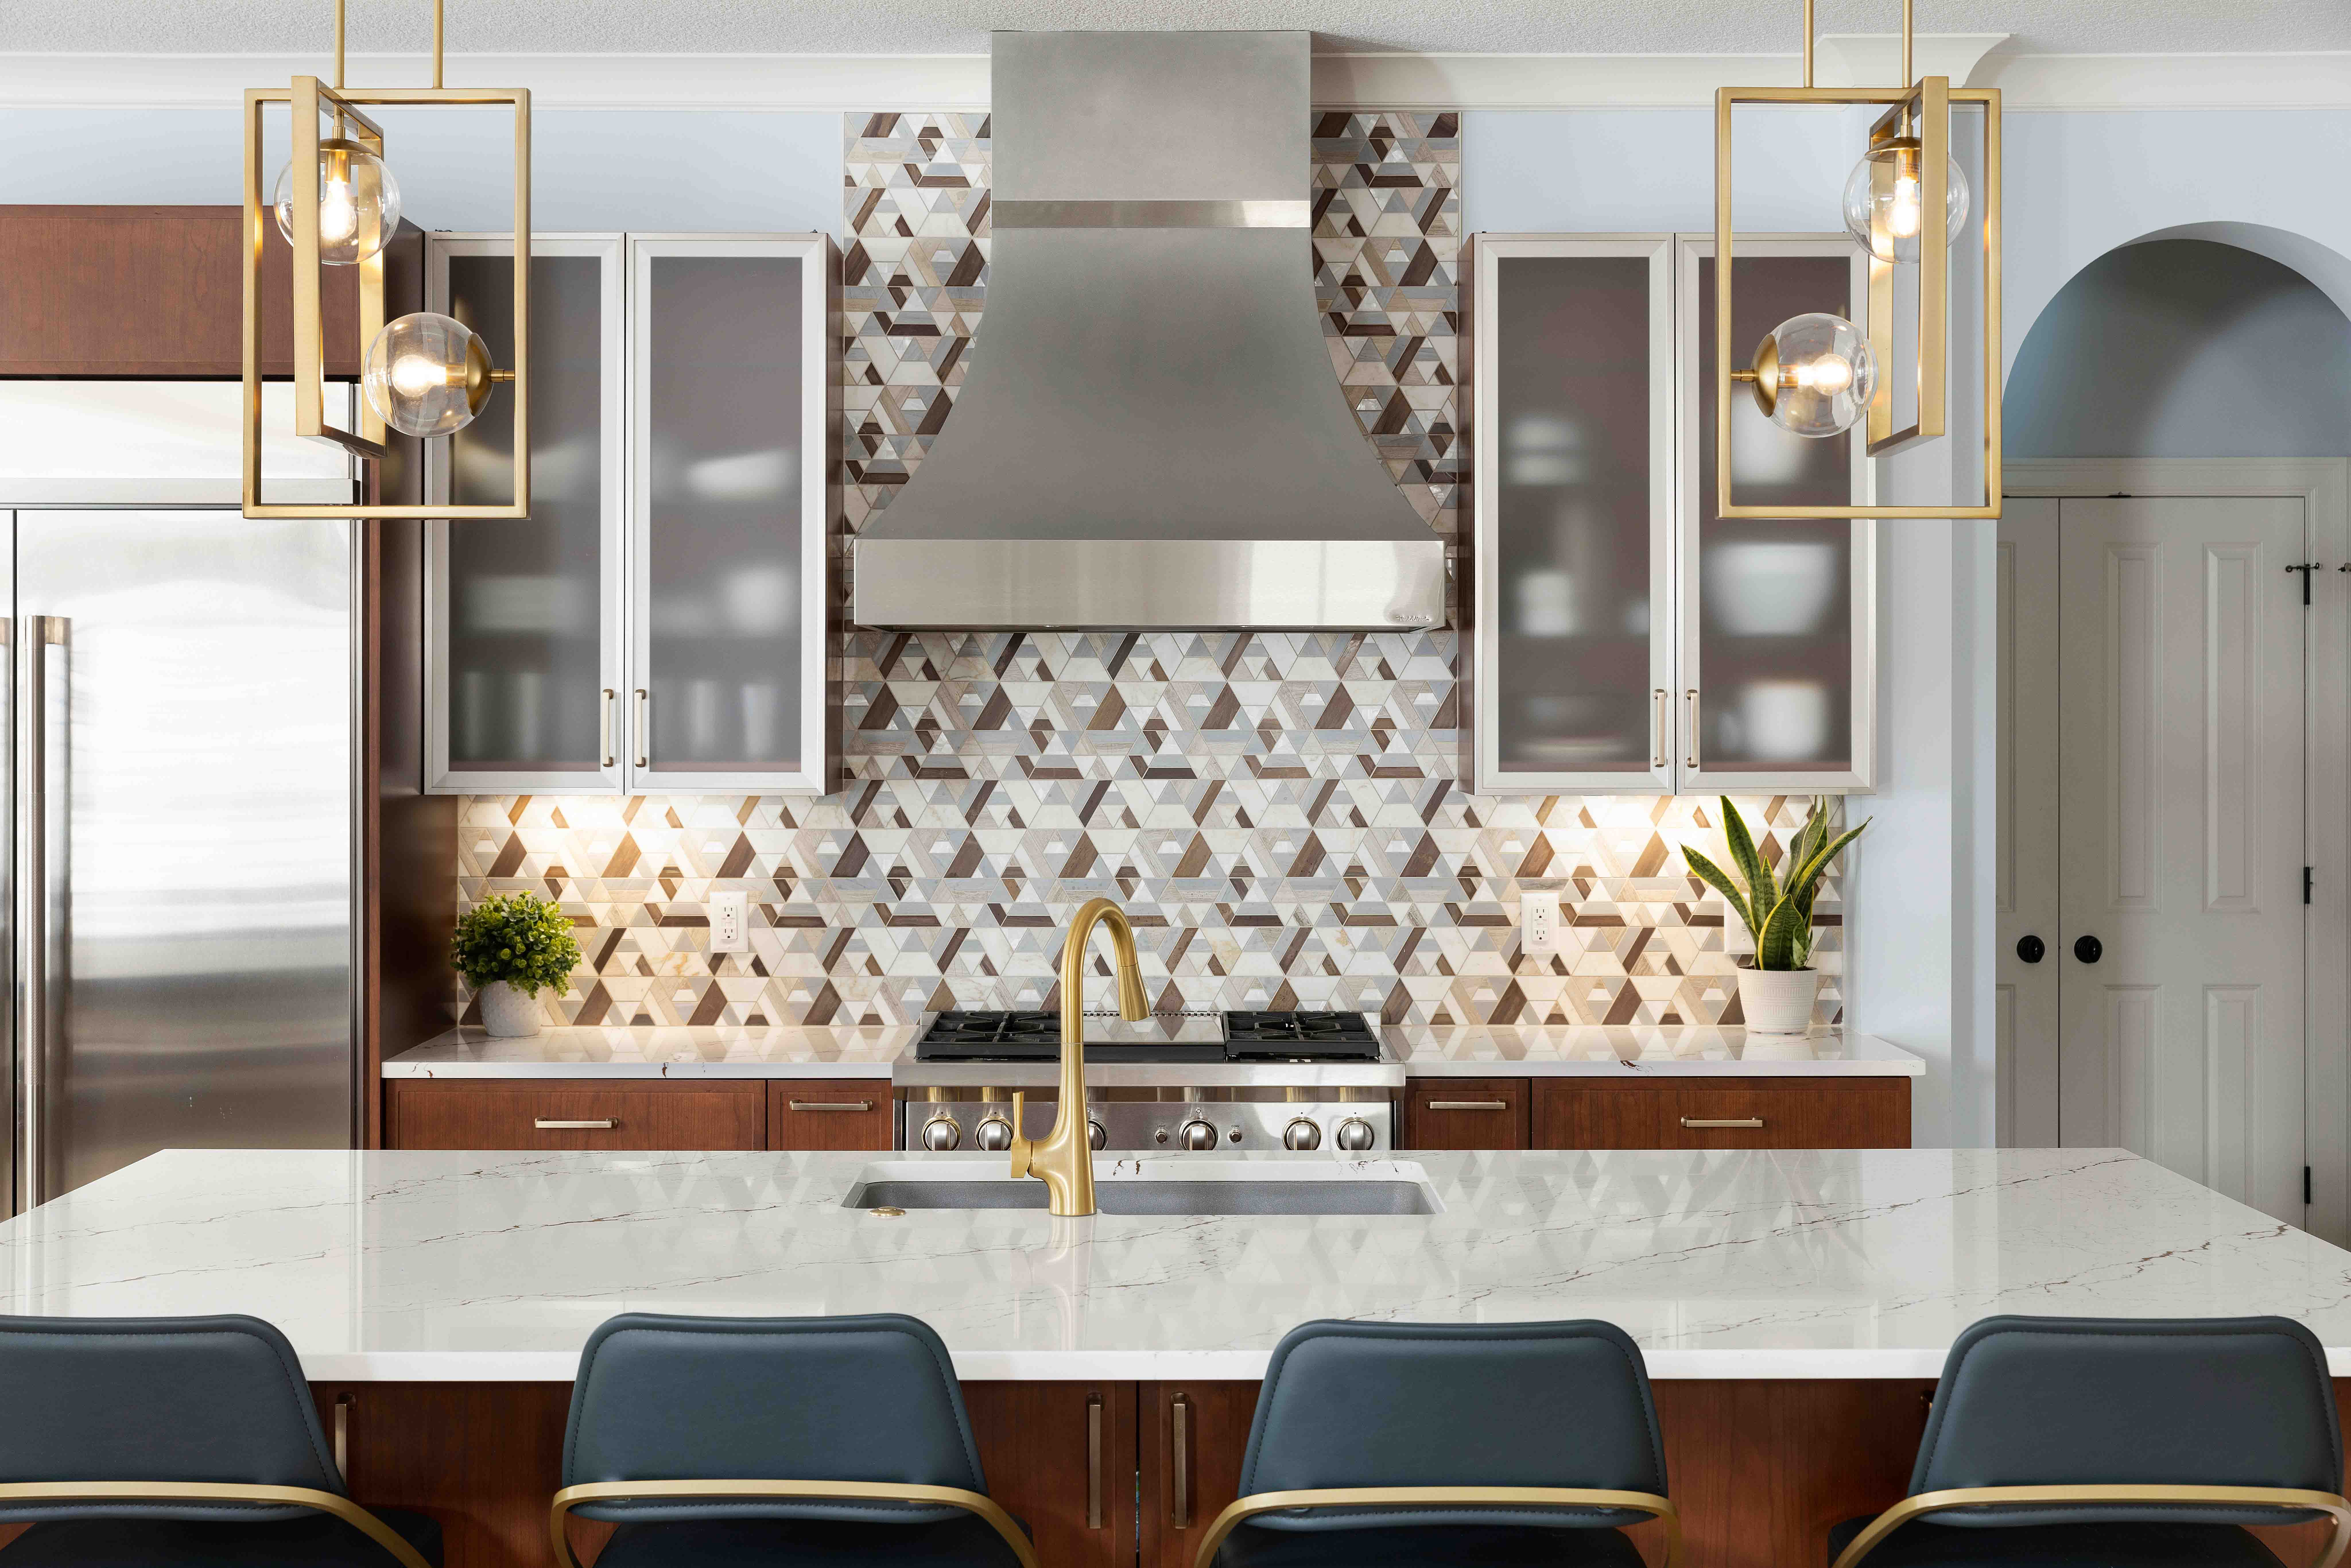 Kitchen remodel with mixed metal accents and patterned backsplash